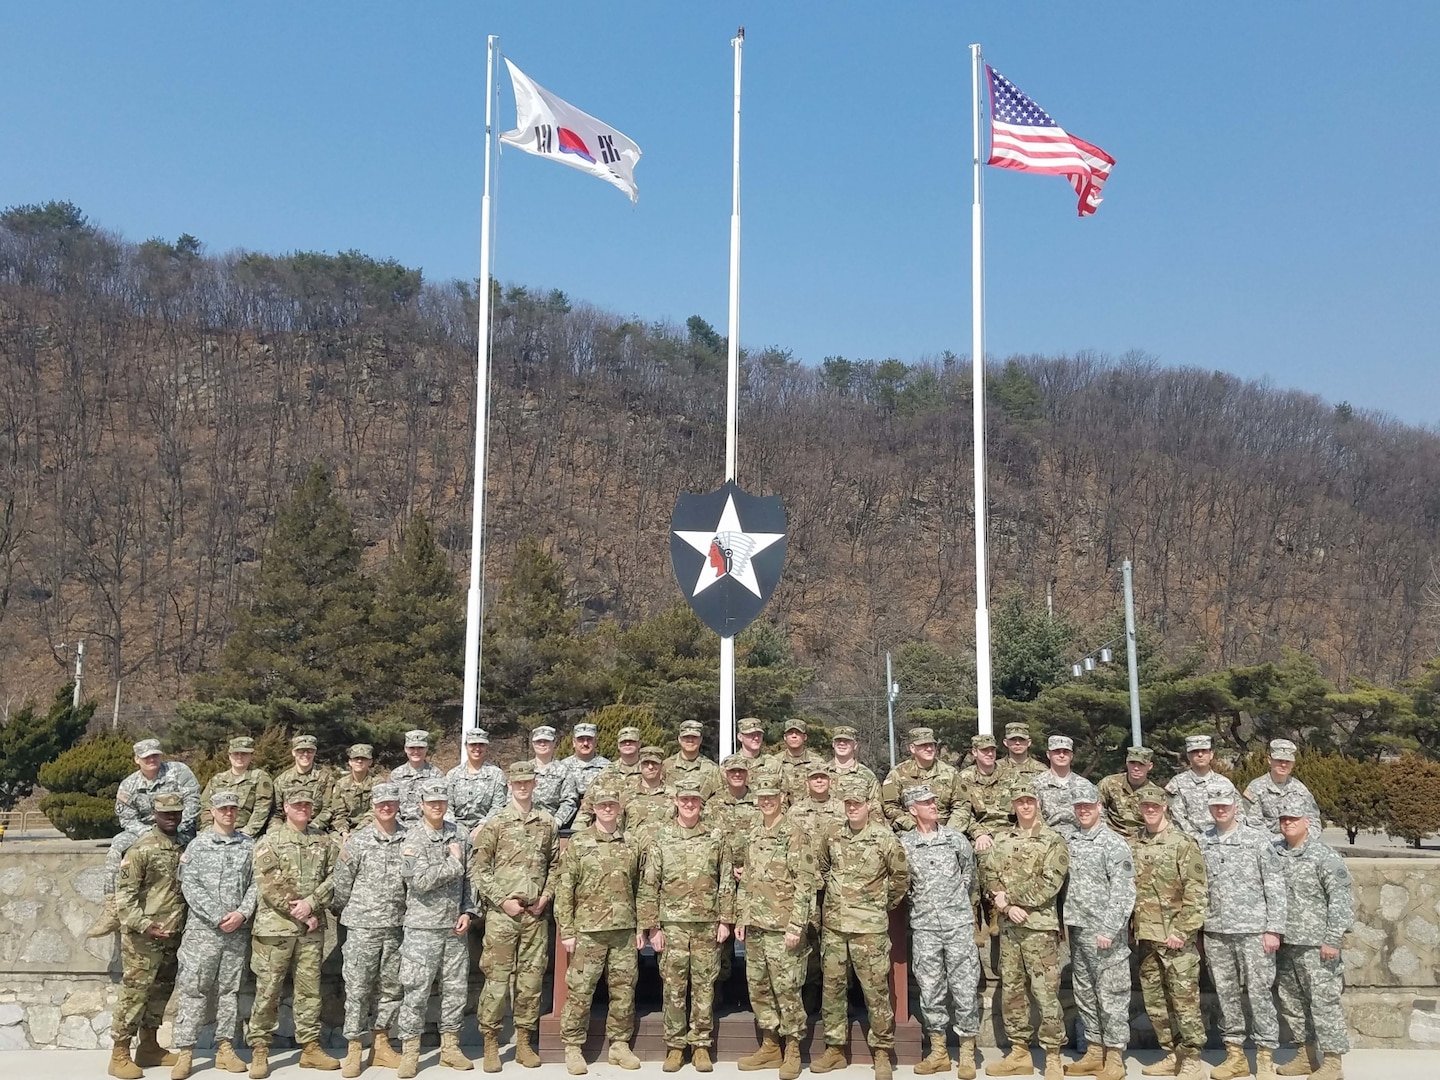 U.S. Army Soldiers of the New York National Guard's 27th Infantry Brigade Combat Team at Camp Casey, Korea supported the combined joint exercise Key Resolve 2017 here as part of the command and control staff with the 2nd Infantry Division. 